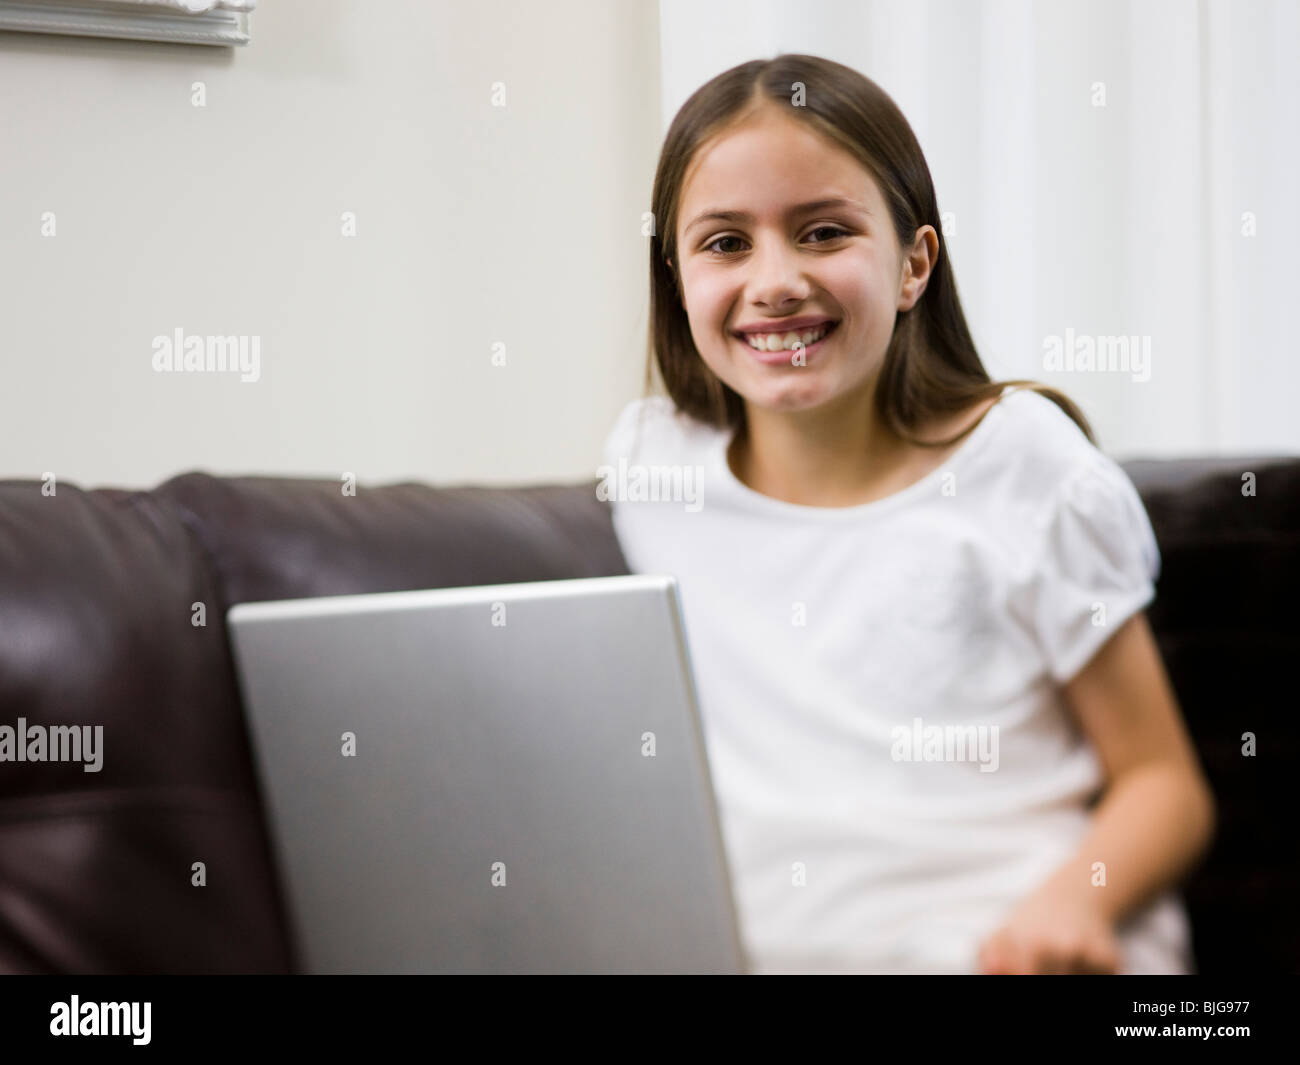 girl on a sofa with a laptop Stock Photo